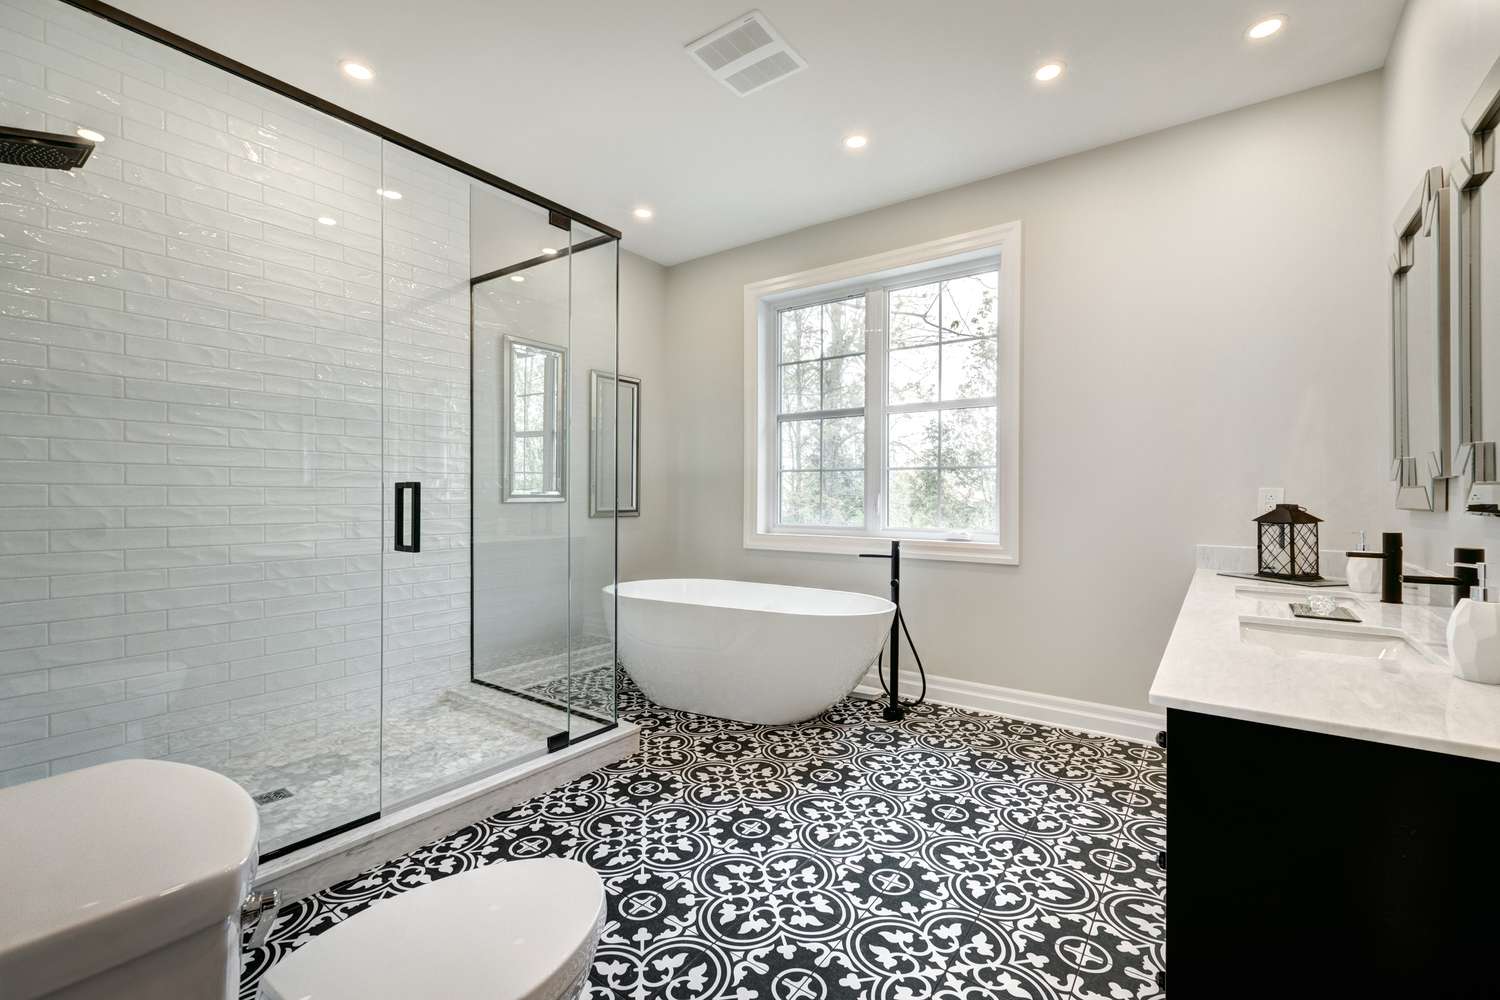 How Bathroom Remodeling Can Increase Your Home’s Value